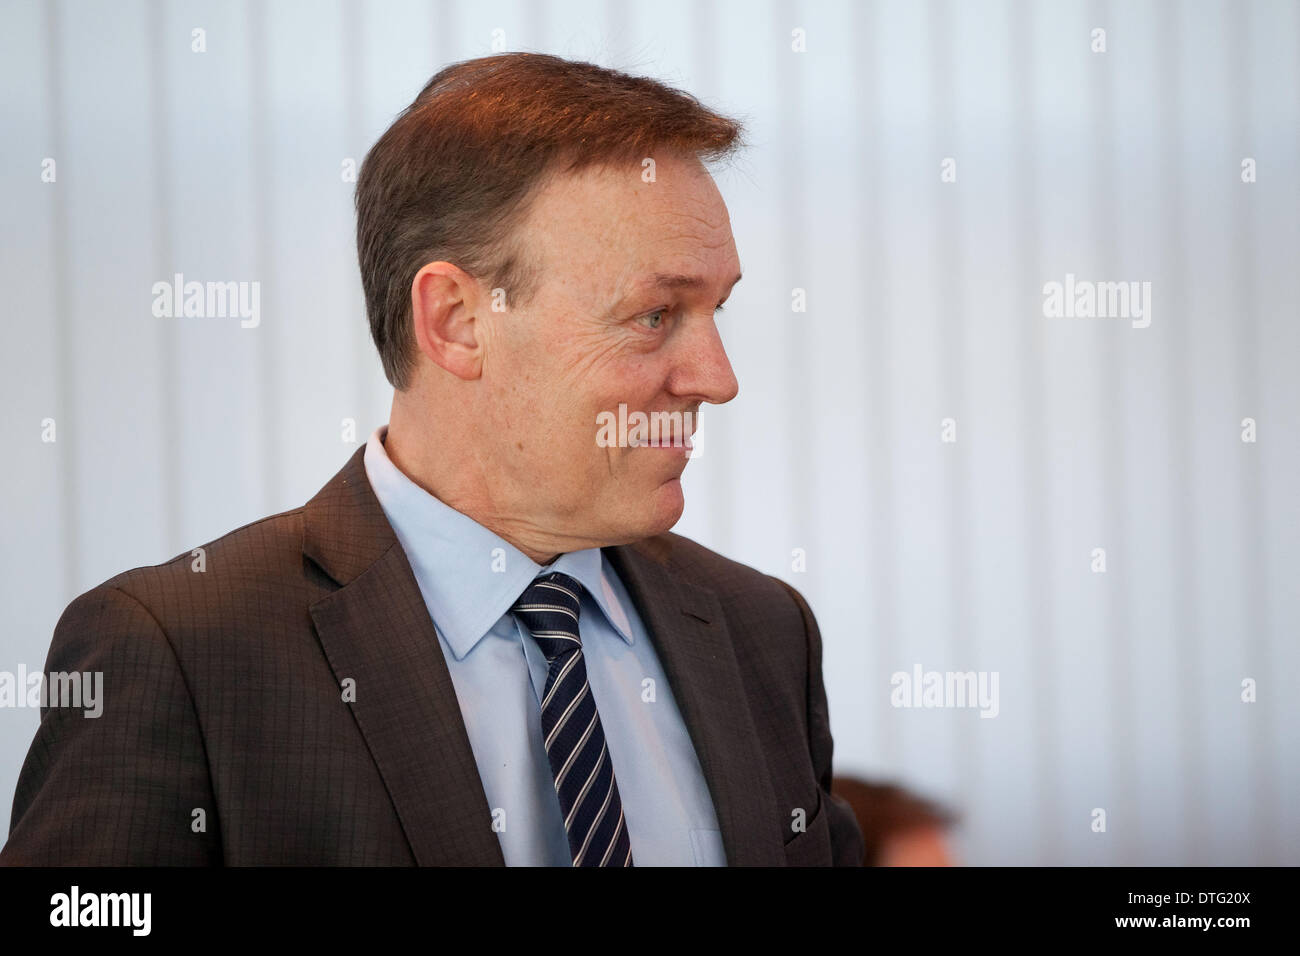 Berlin, Germany. 17th Feb, 2014. SPD party leadership meeting at Willy Brandt Haus in Berlin. / Picture: Thomas Oppermann (SPD), Lider of the SPD Parliamentary Group. Credit:  Reynaldo Paganelli/NurPhoto/ZUMAPRESS.com/Alamy Live News Stock Photo